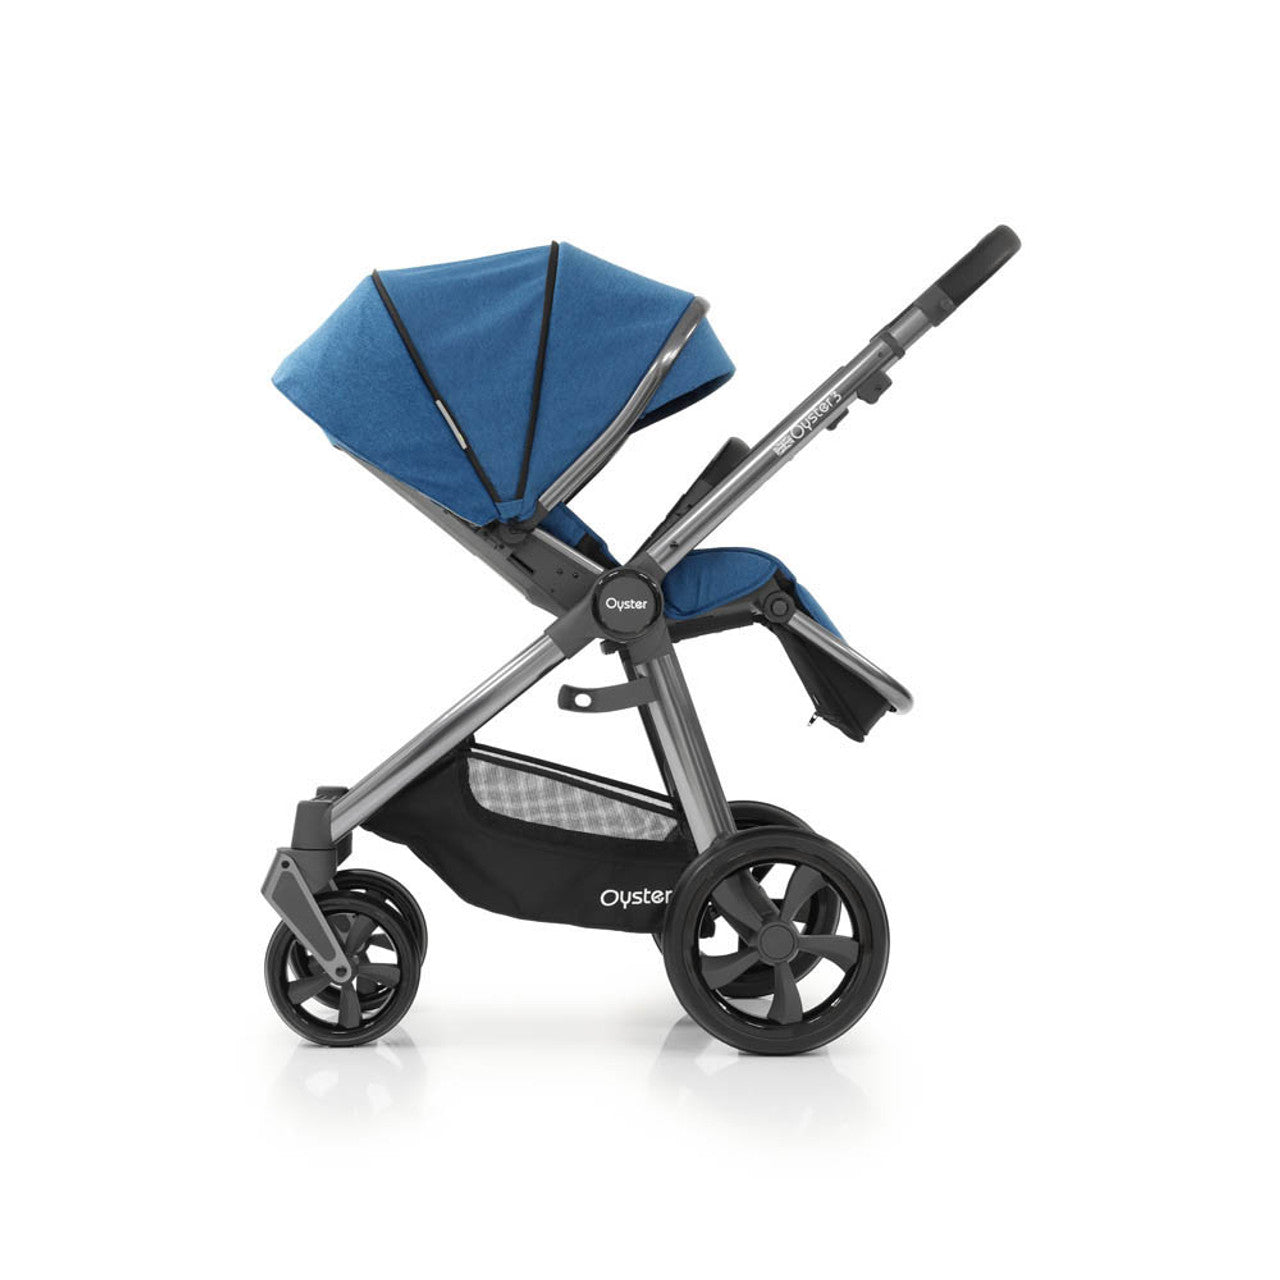 Babystyle Oyster 3 Pushchair - Gun Metal Chassis/Kingfisher